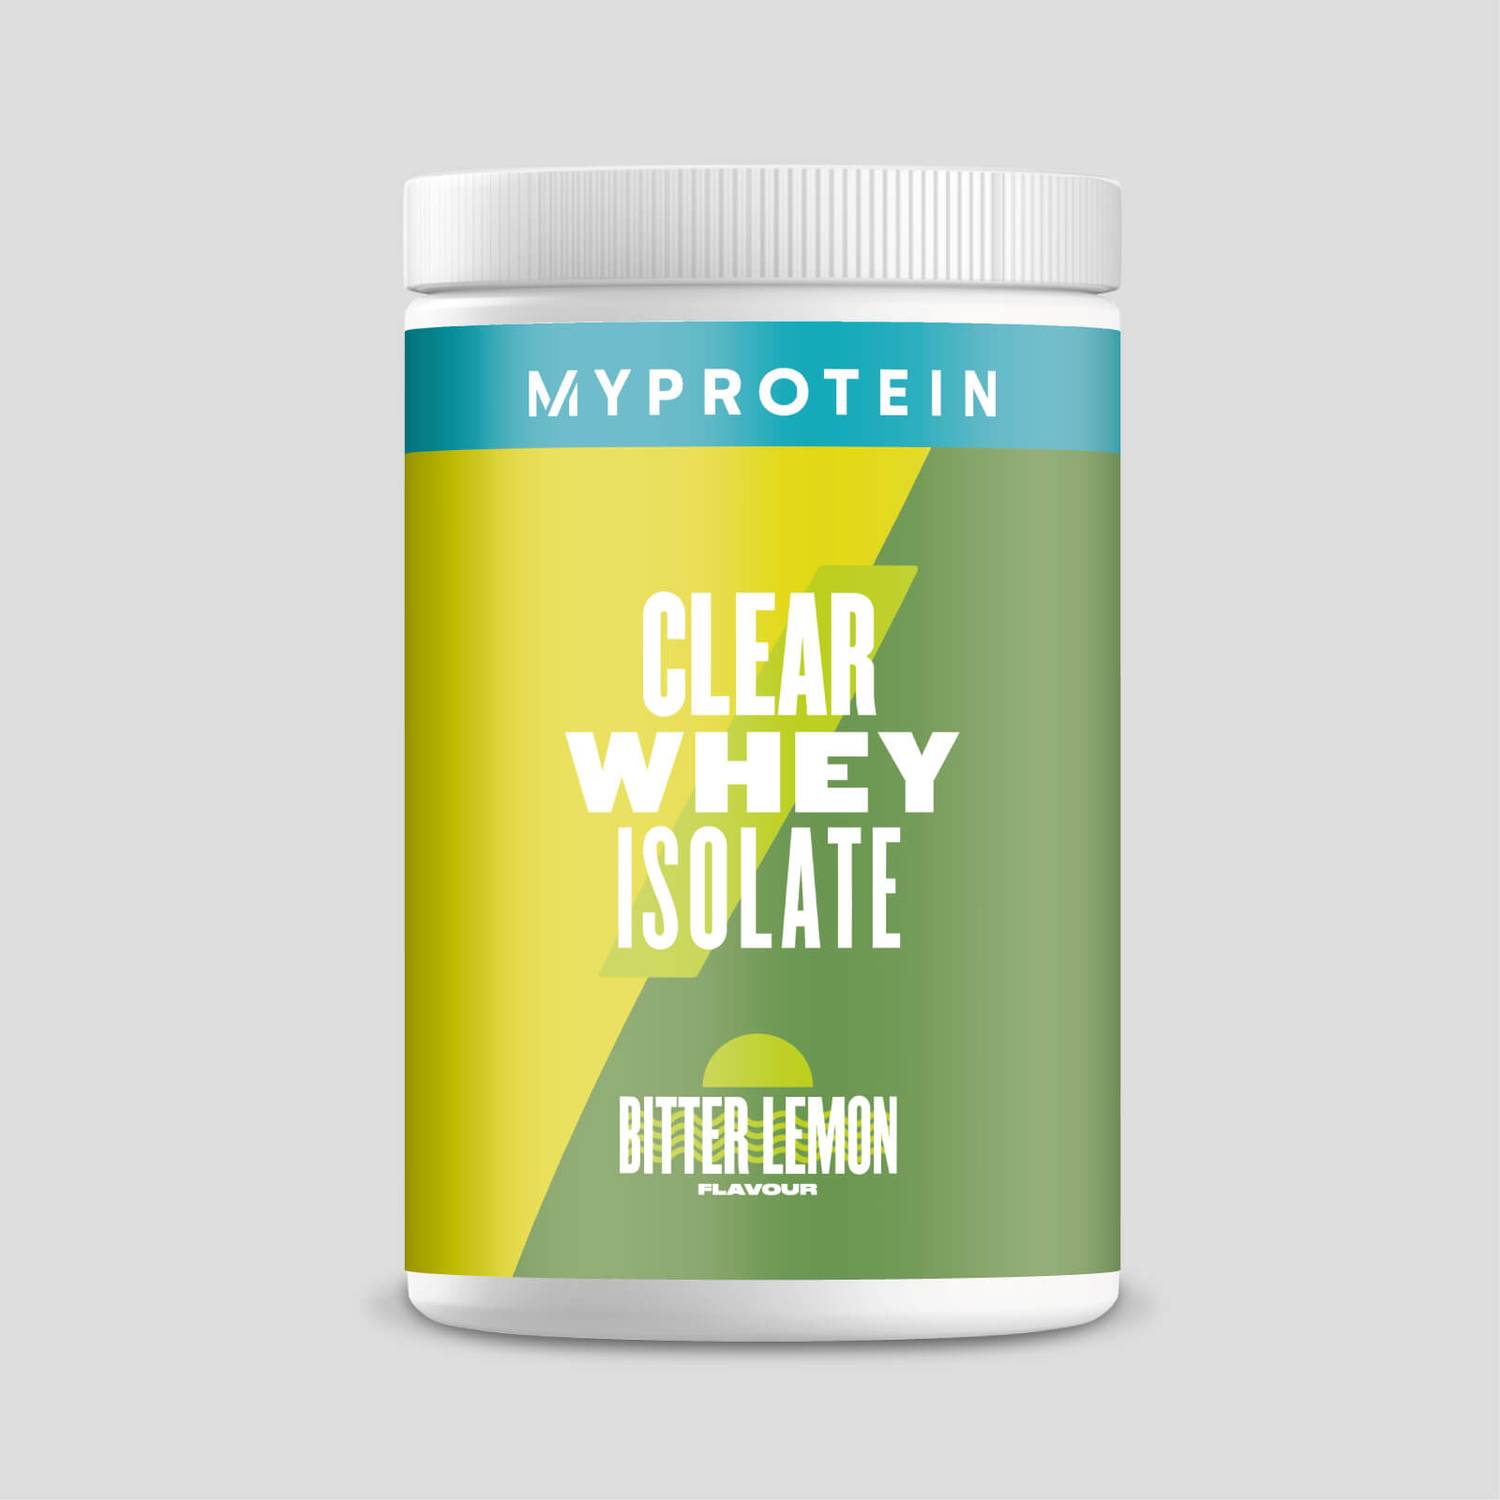 MyProtein Clear Whey Isolate (20 Portionen Dose)